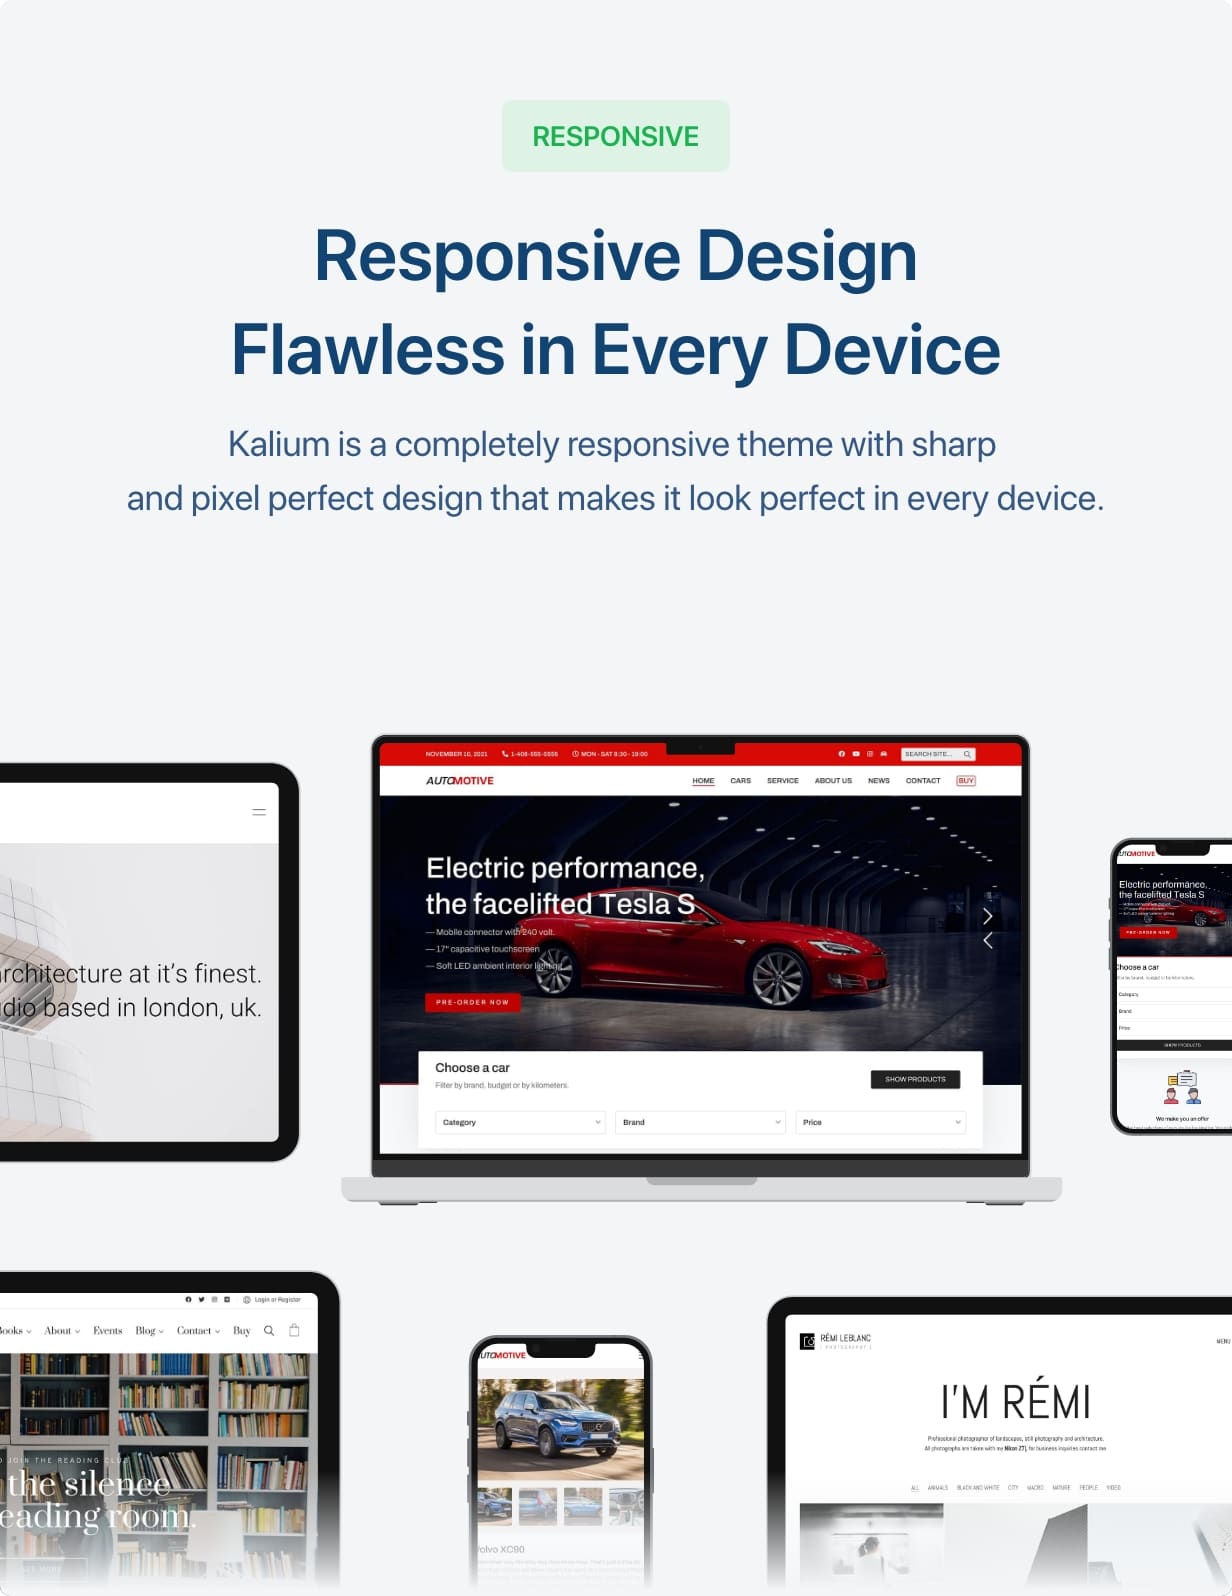 Responsive Design, Flawless in Every Device